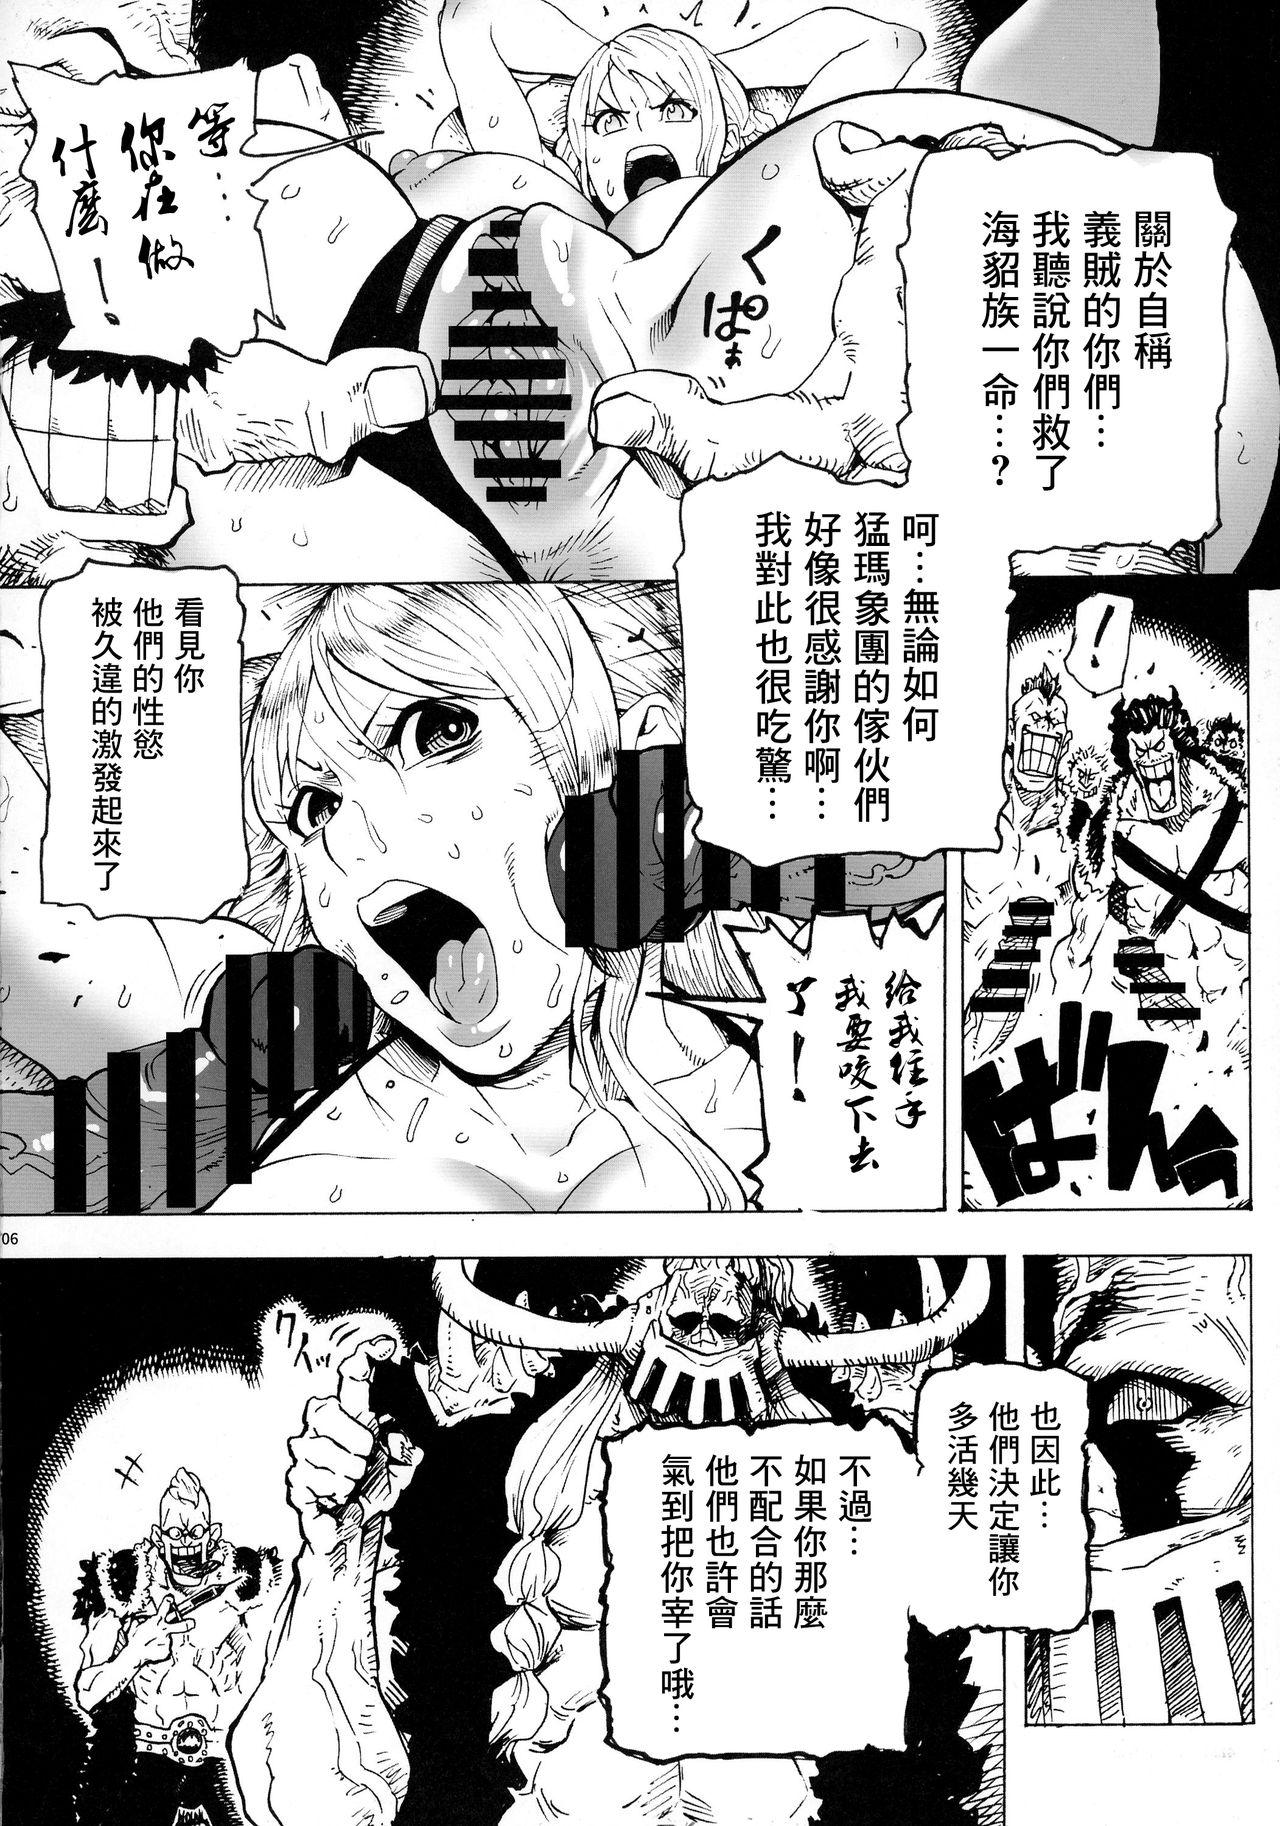 Dildo Fucking P.O.M Another Episode "J.A.C.K" - One piece Gag - Page 9